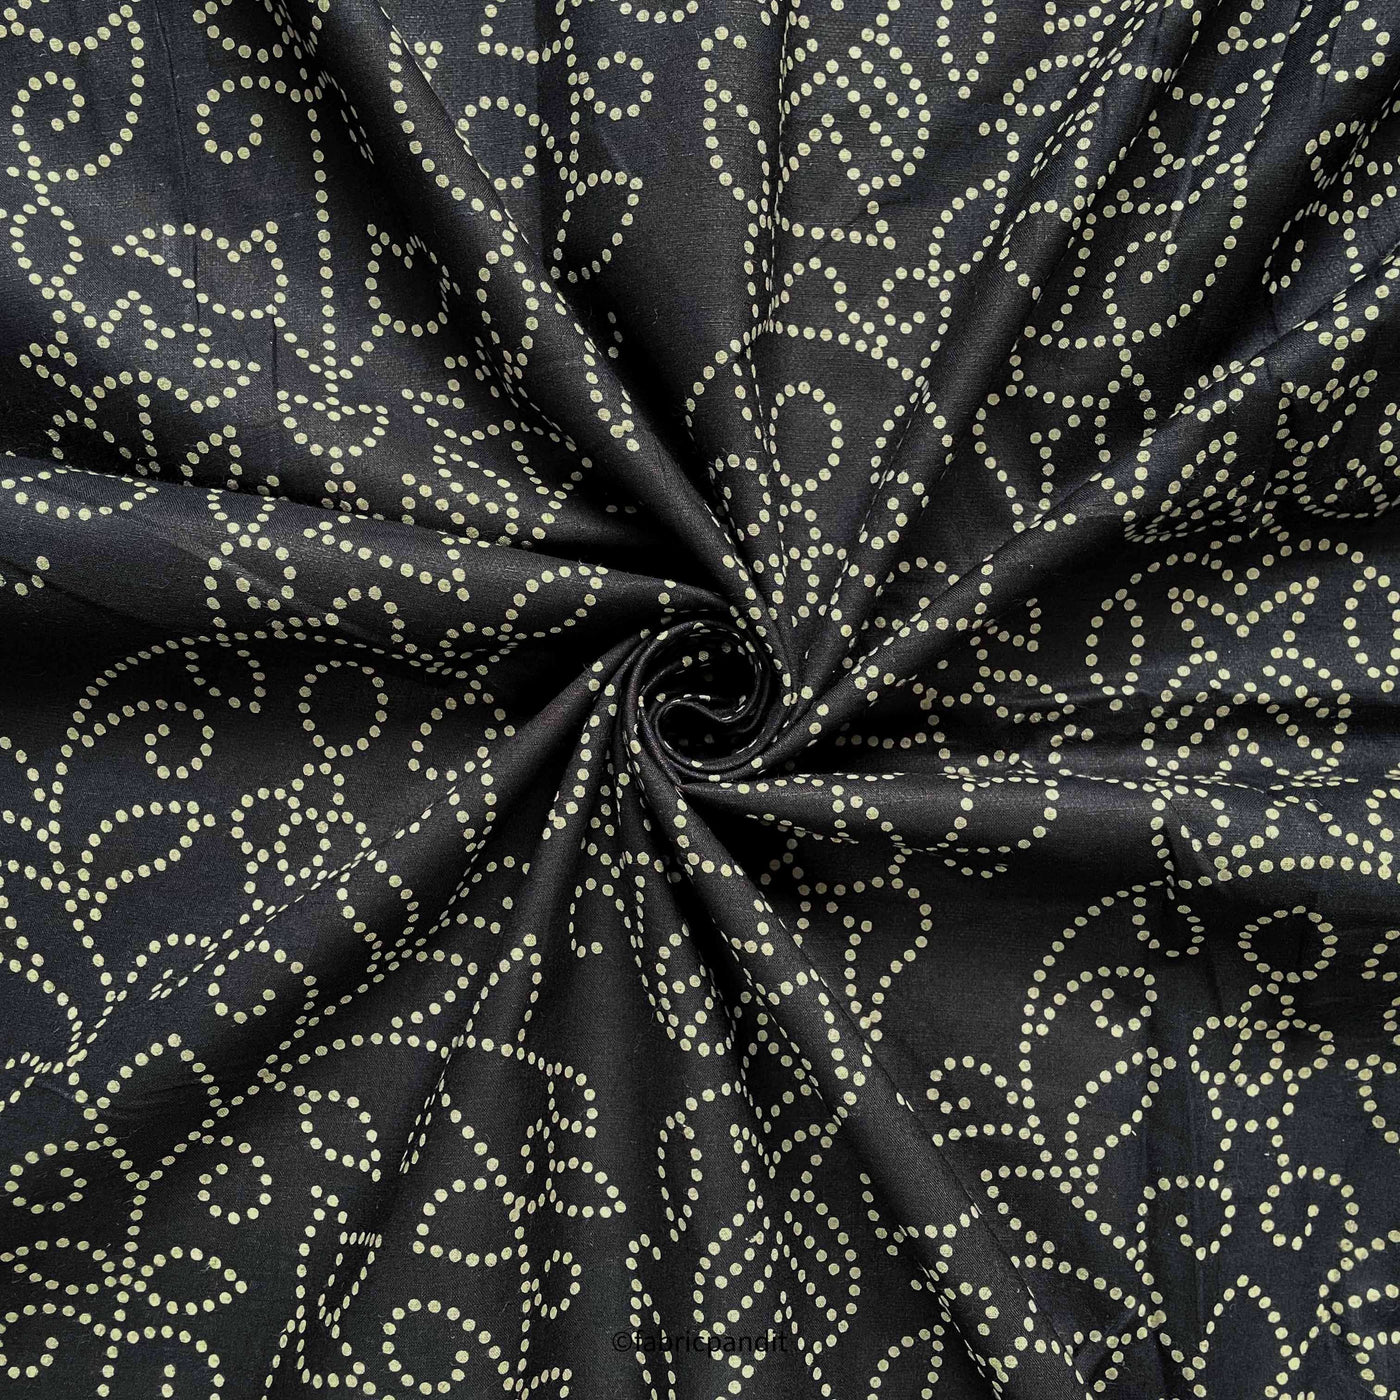 Hand Block Printed Cotton Fabric Cut Piece (CUT PIECE) Black & Beige Traditional Bandhani Pattern Floral Jaal Hand Block Printed Pure Cotton Fabric (Width 42 inches)